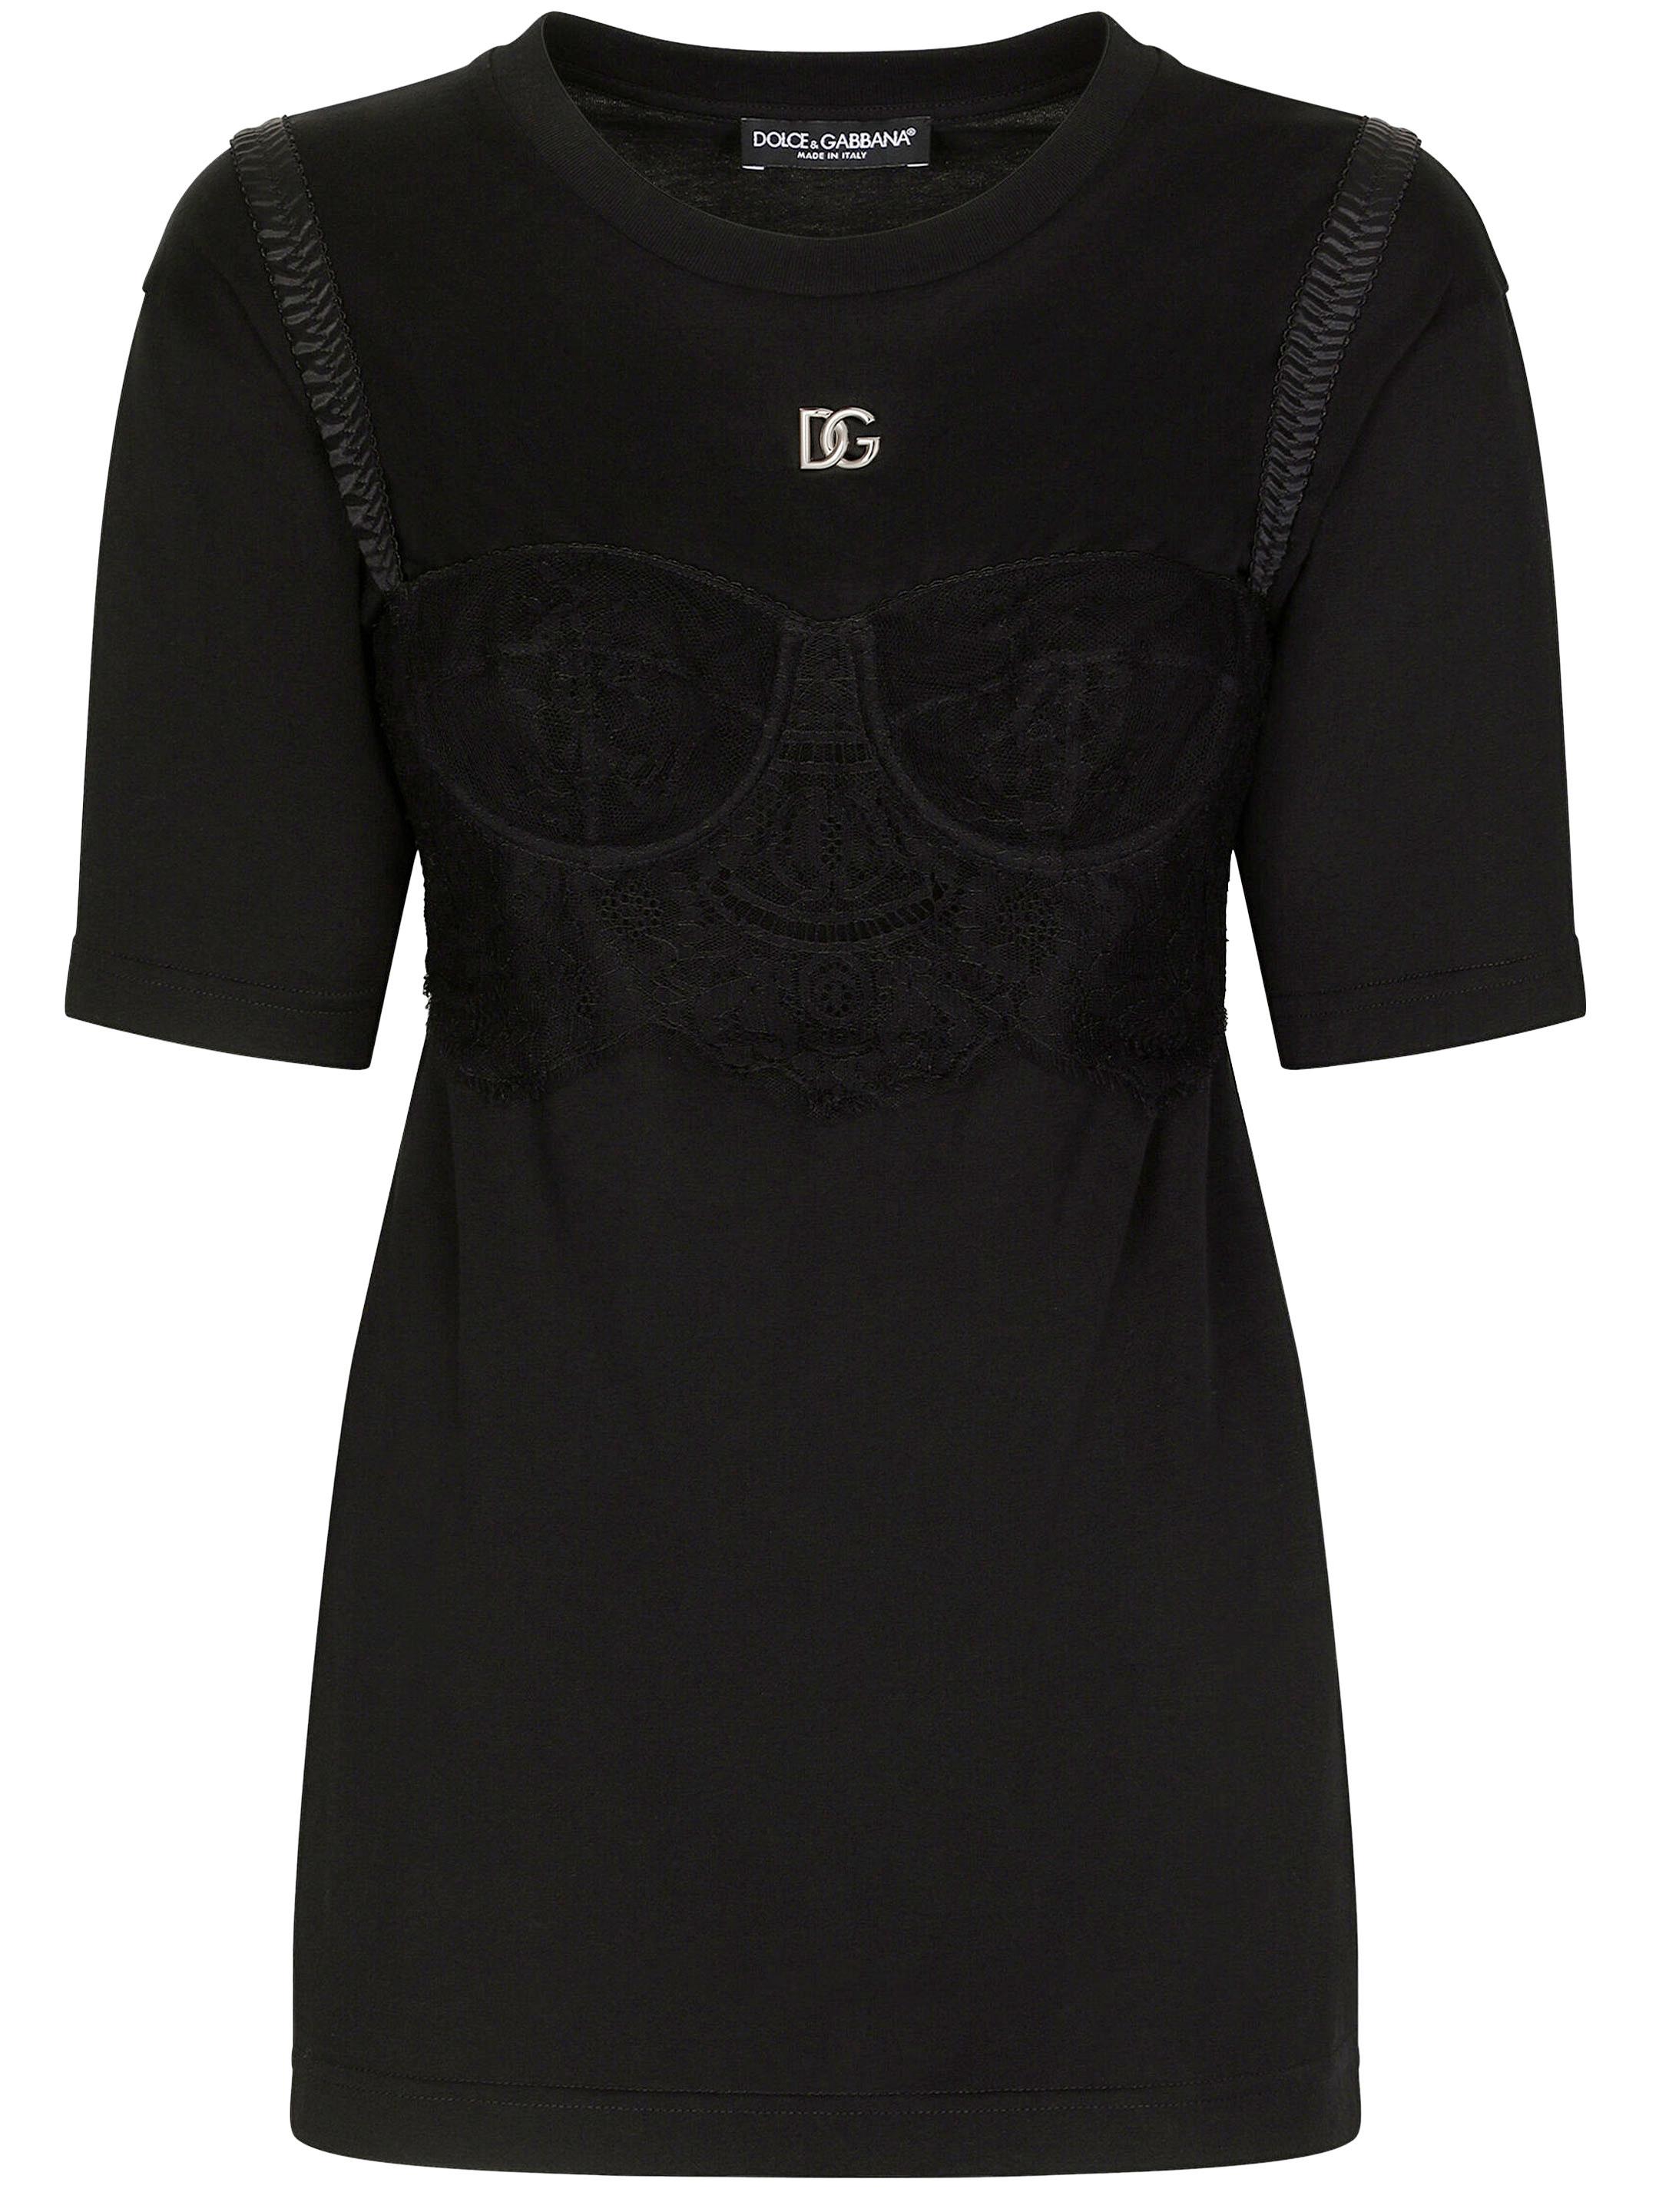 Dolce & Gabbana T-shirt With Lace Bralette in Black | Lyst